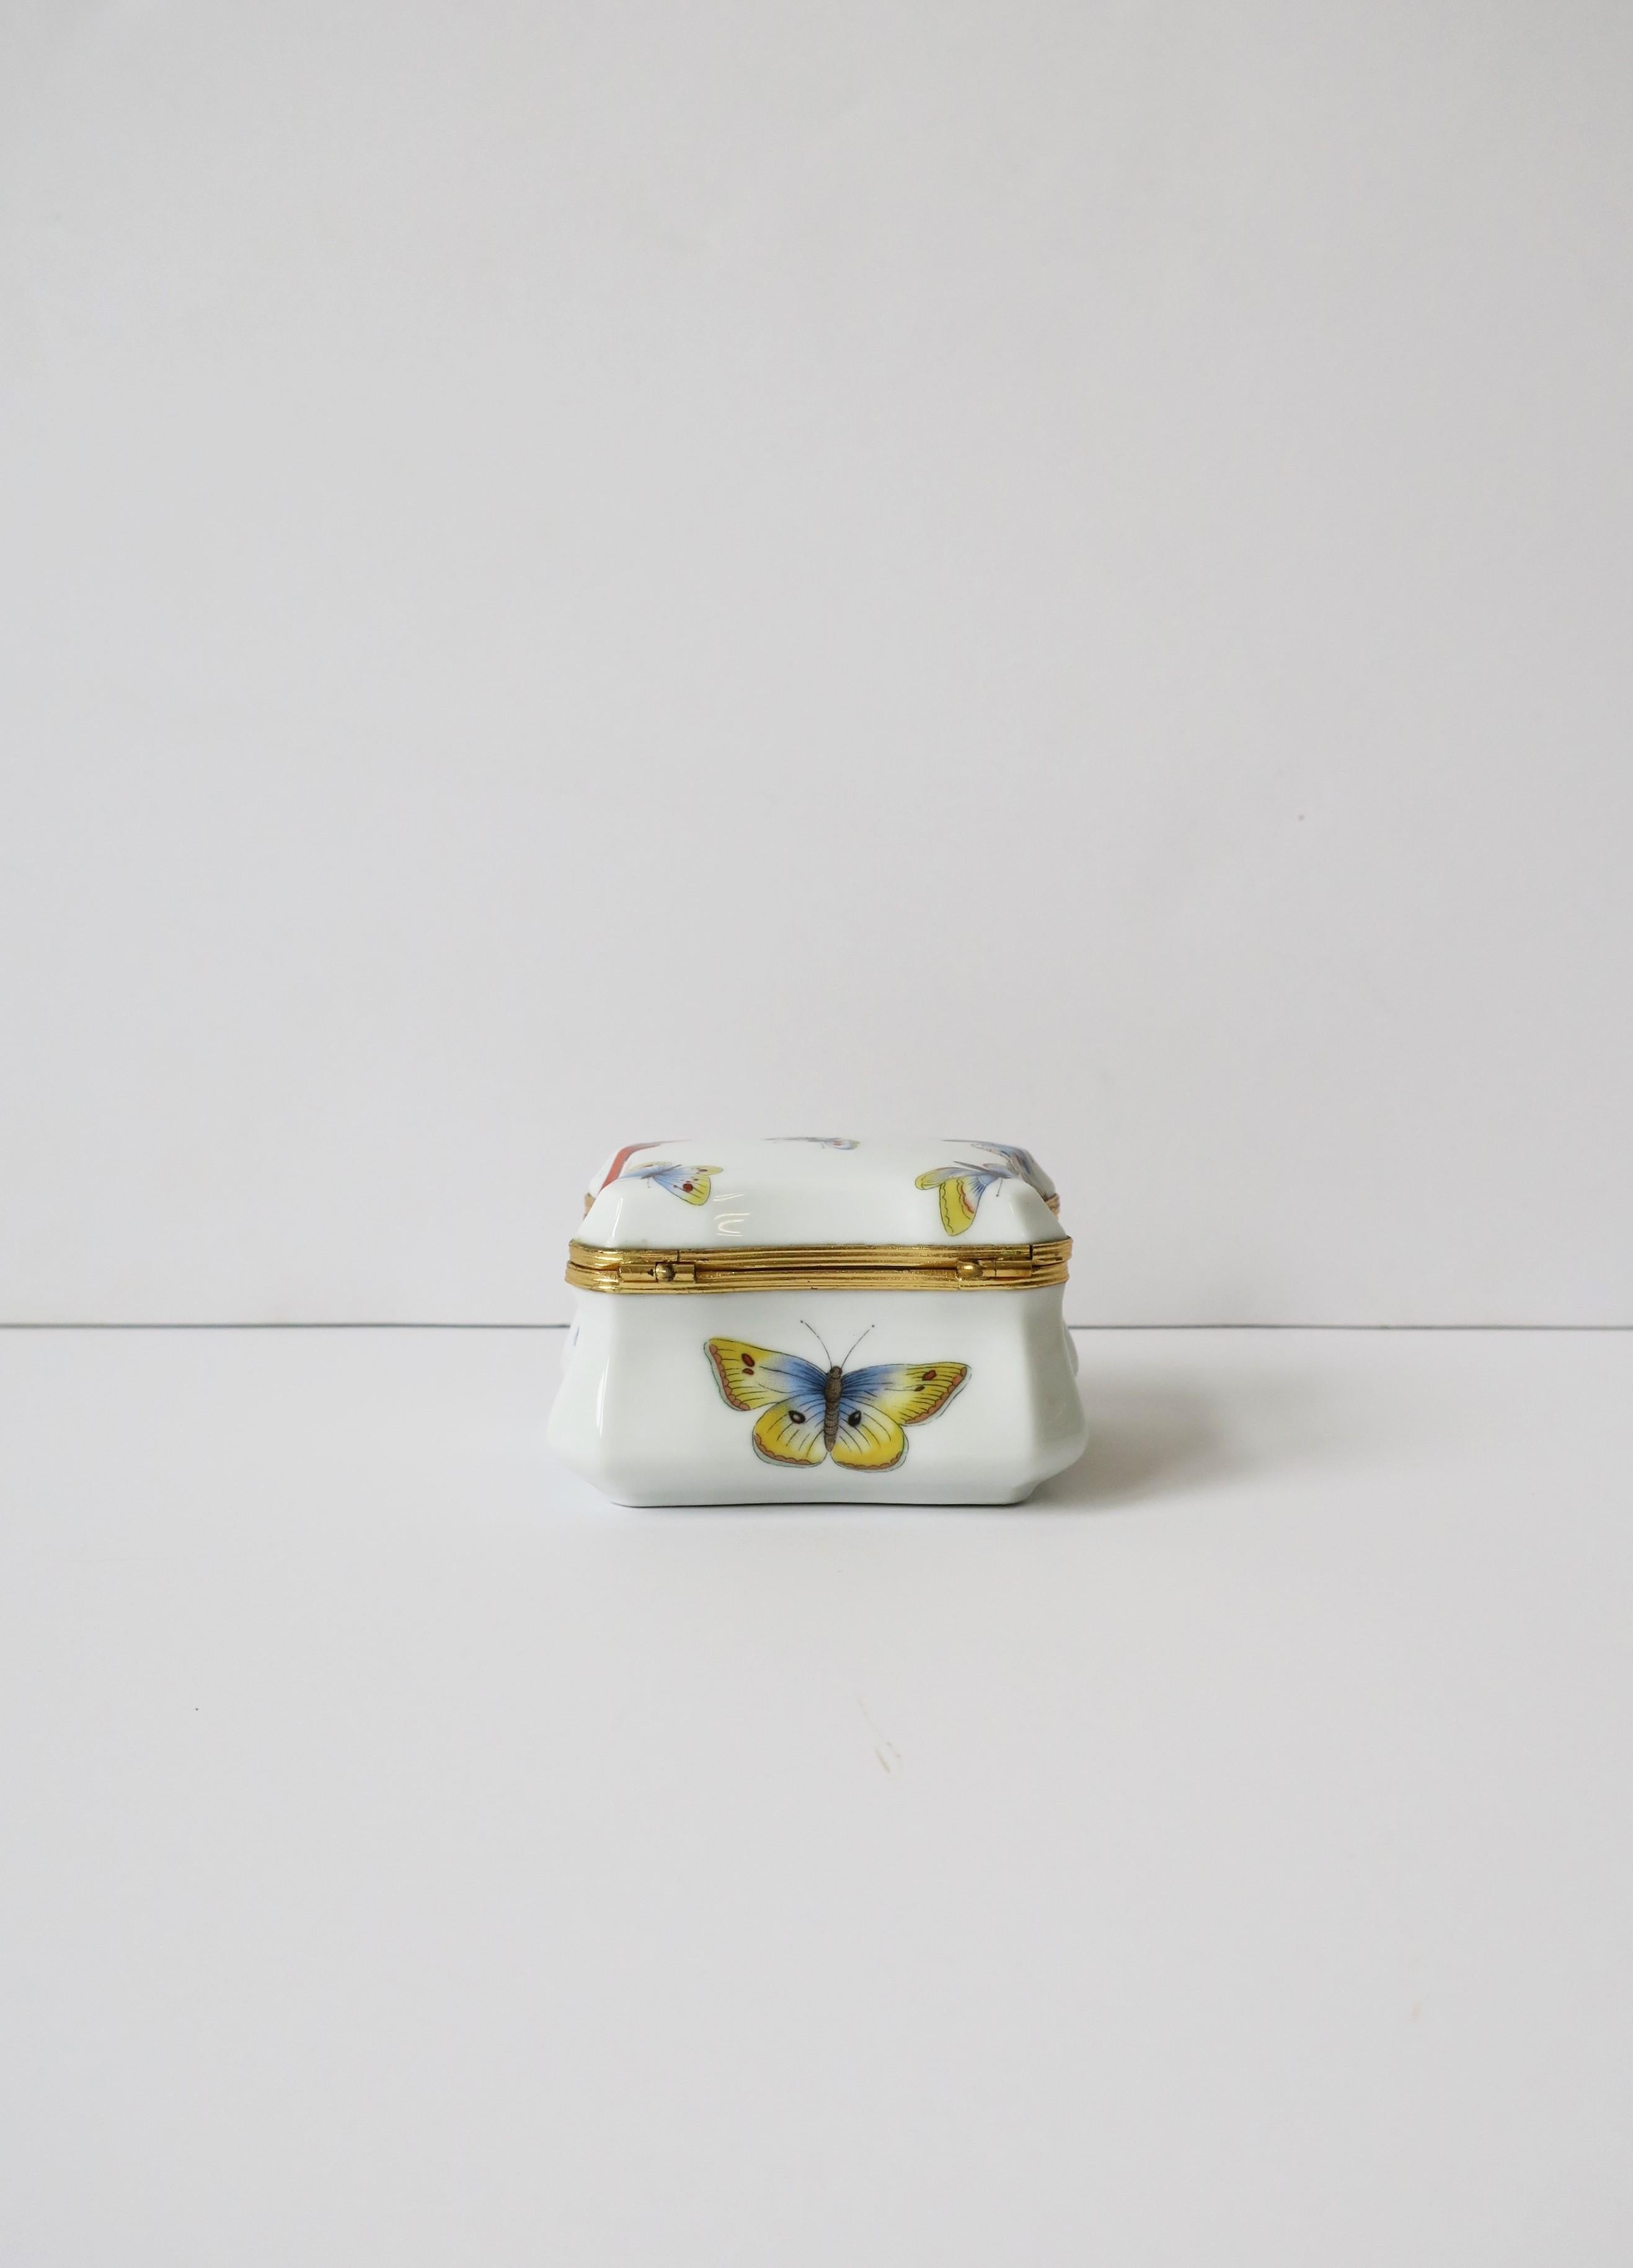 Butterfly Jewelry Box French Porcelain 12